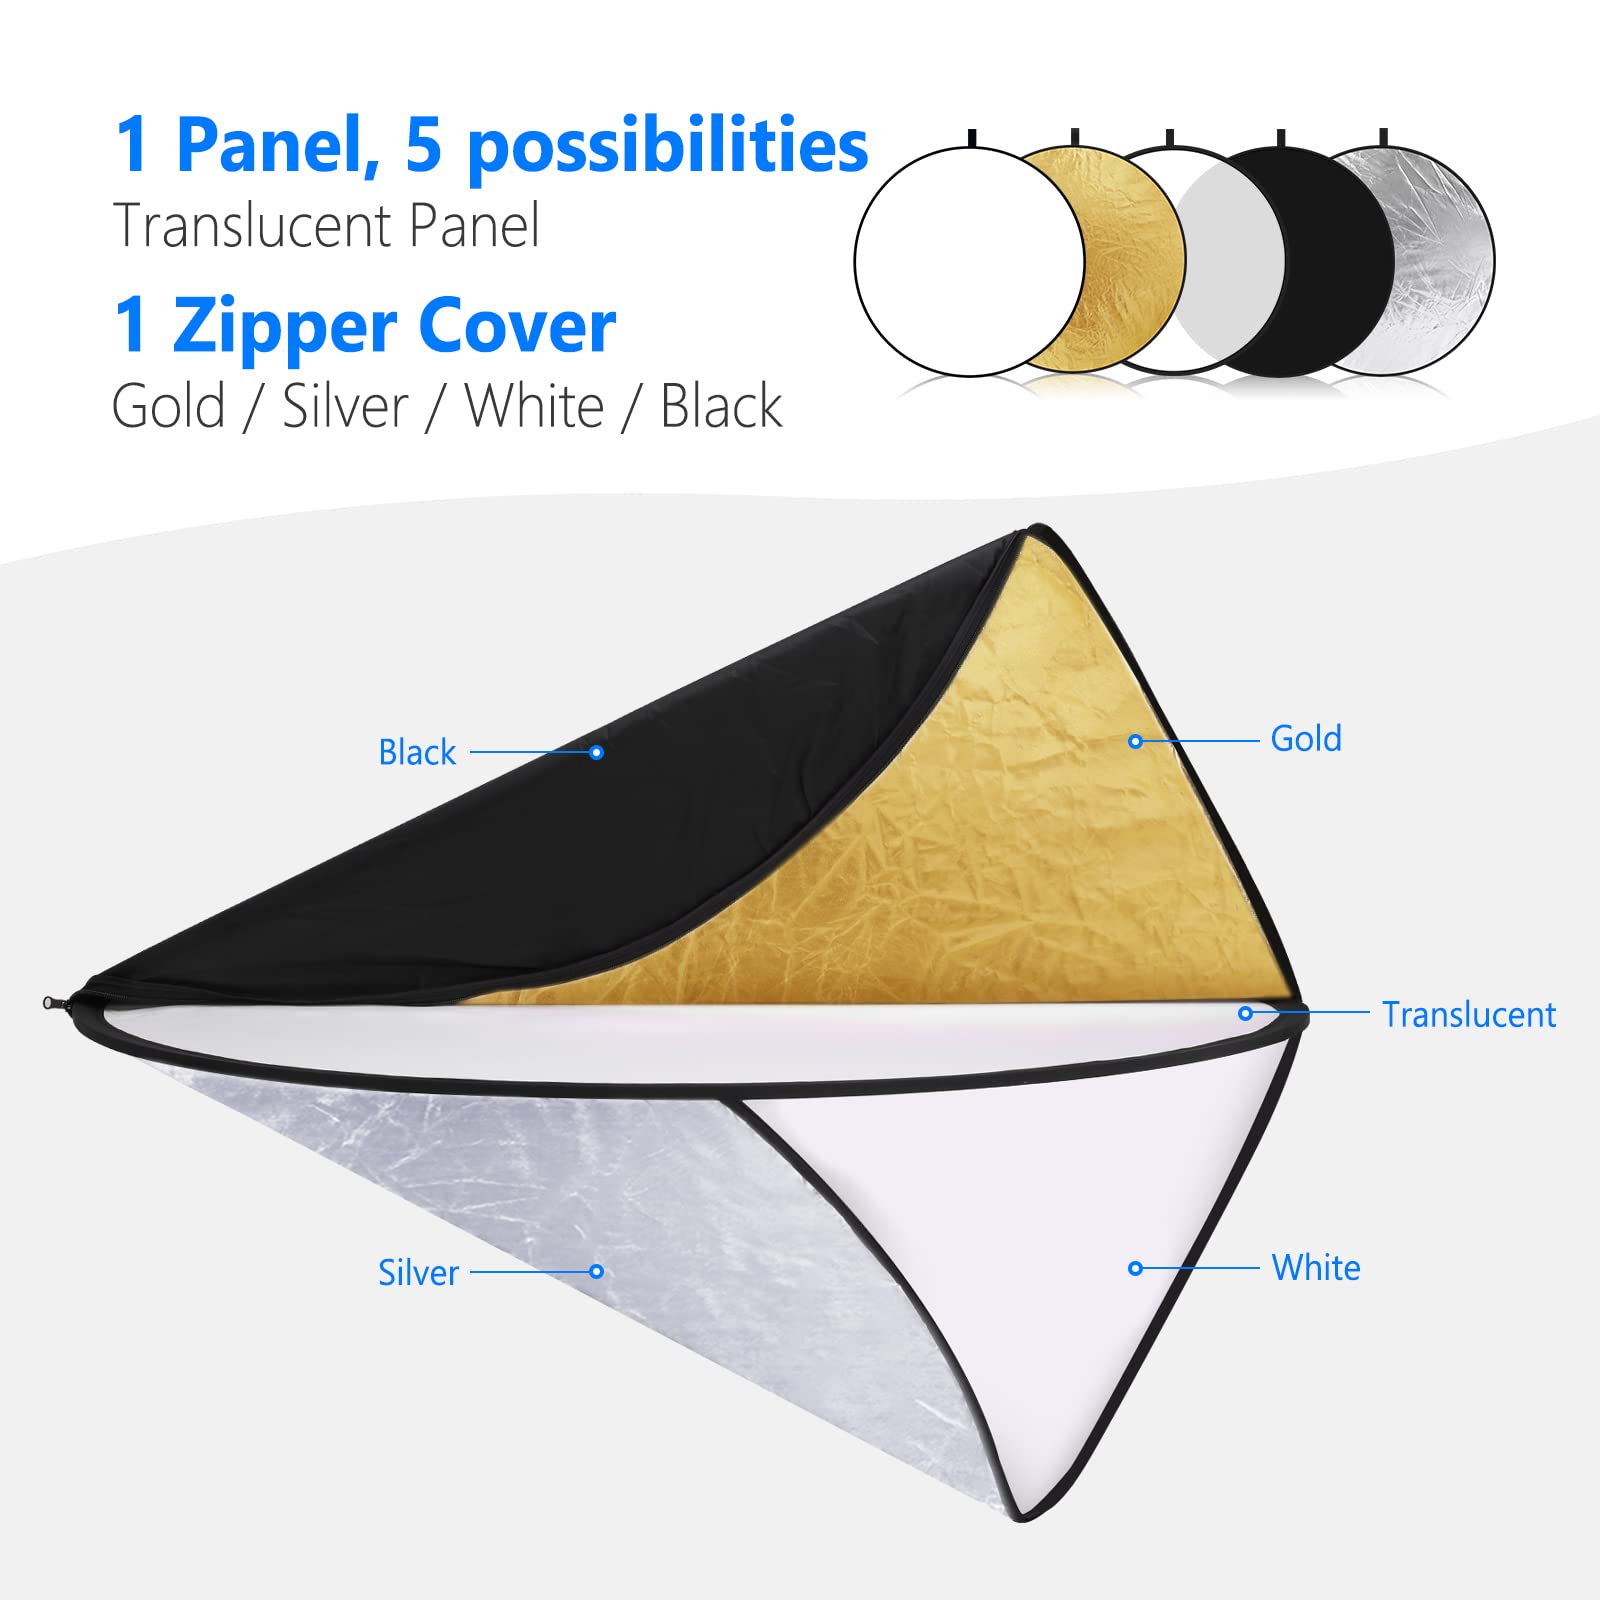 NEEWER 43 Inch/110 Centimeter Light Reflector Light Diffuser 5 in 1 Collapsible Multi Disc with Bag - Translucent, Silver, Gold, White, and Black for Studio Photography Lighting and Outdoor Lighting